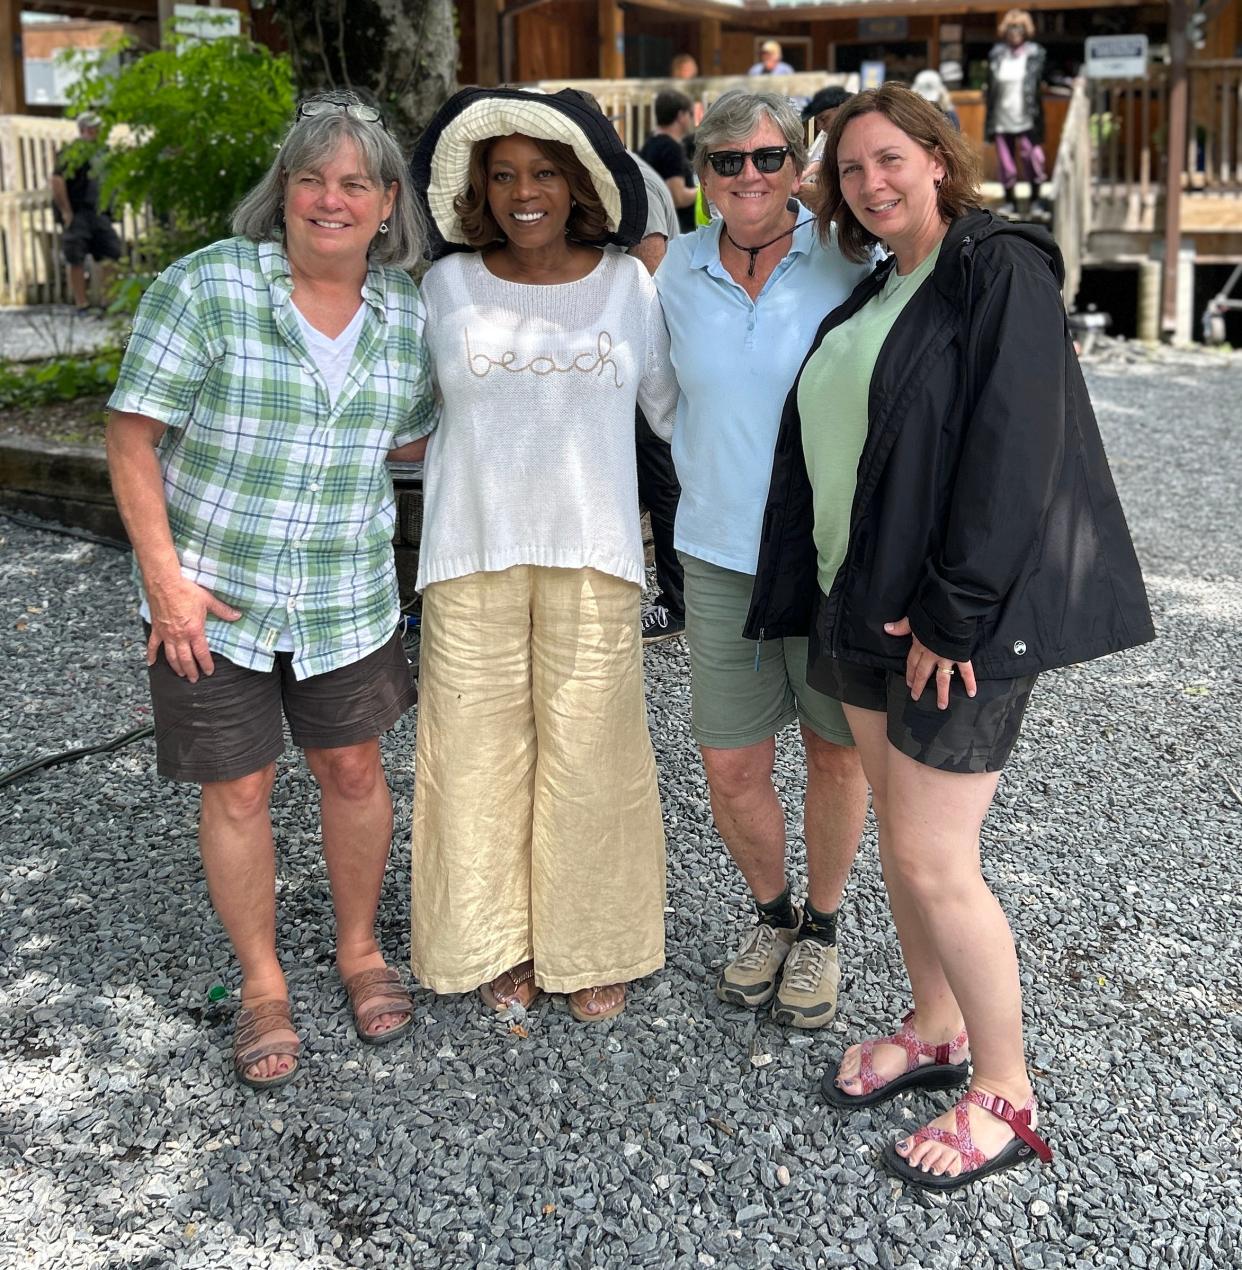 From left to right are Celia Watt, Alfre Woodard, Ann Whisenhunt and Catie Patrey. They posed for a group shot during the filming of "Summer Camp" last year at Camp Pinnacle. The movie hits theaters on May 31.